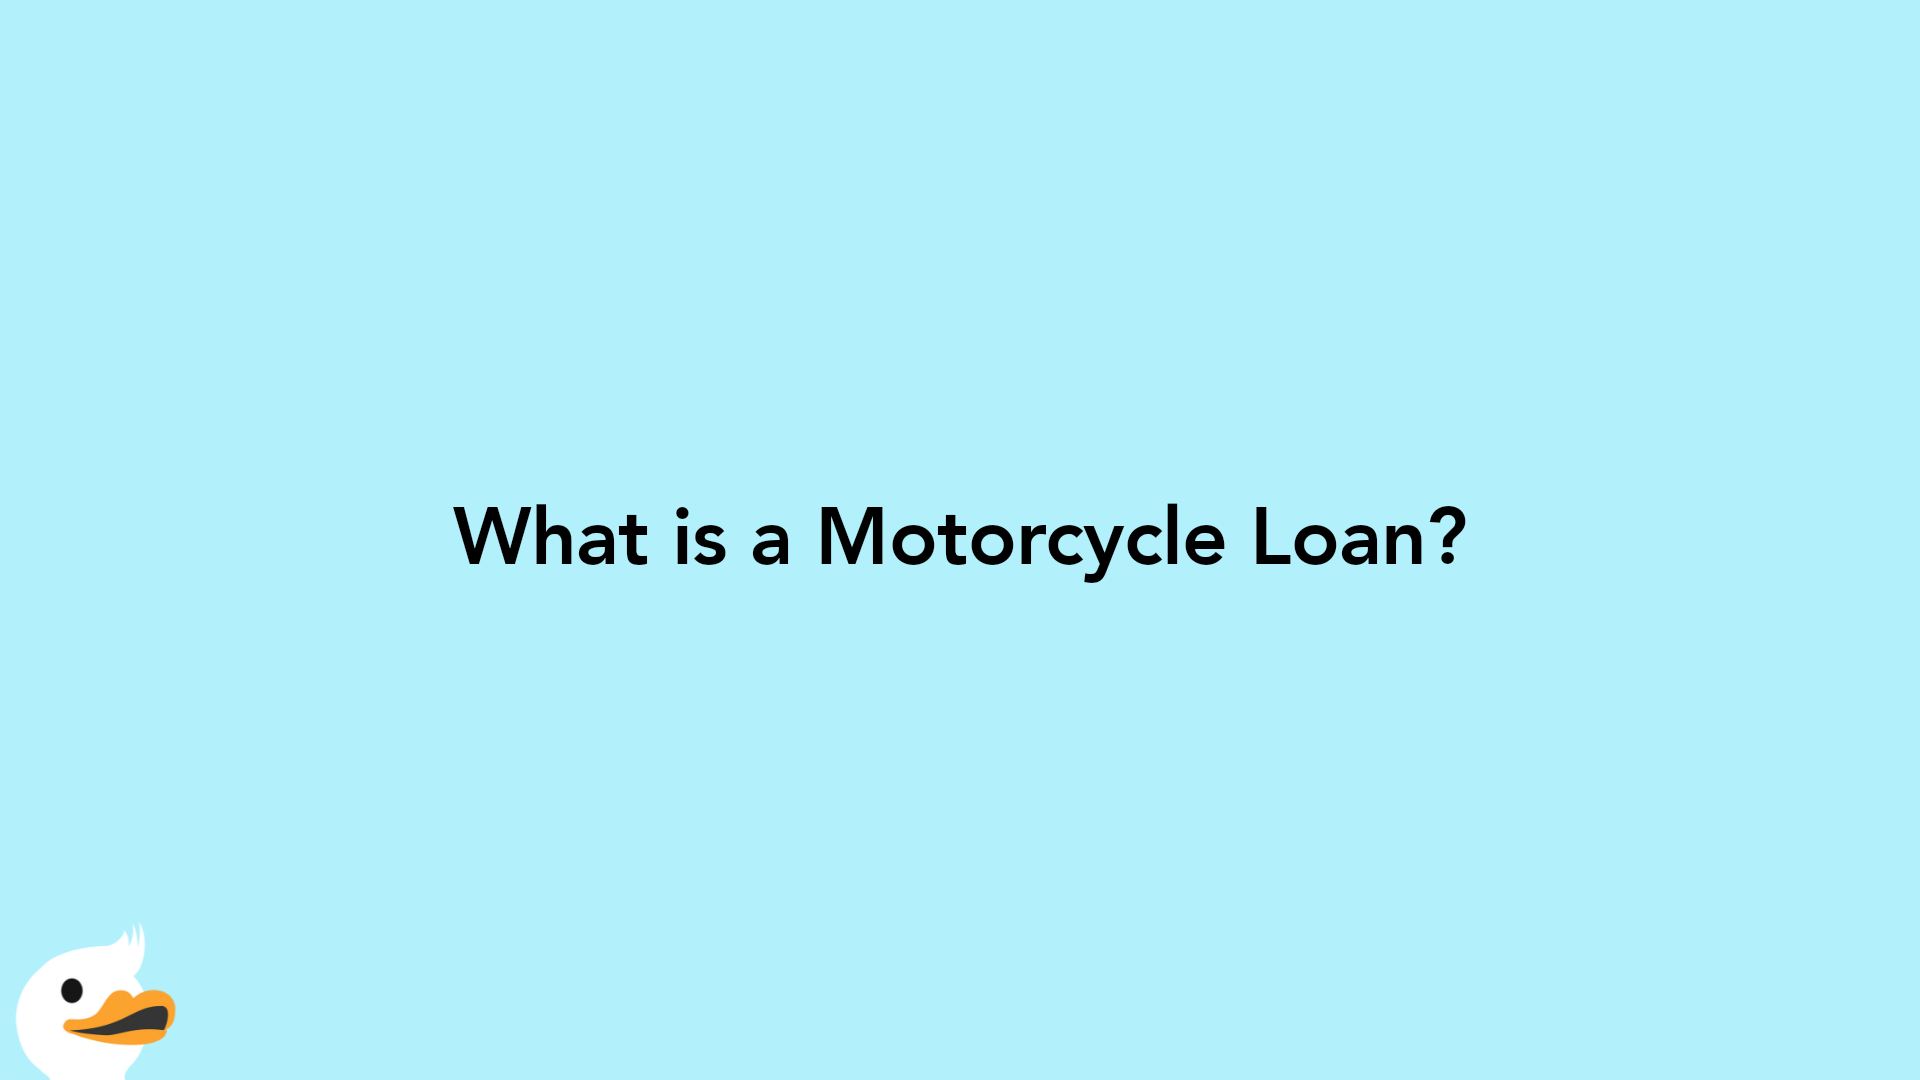 What is a Motorcycle Loan?